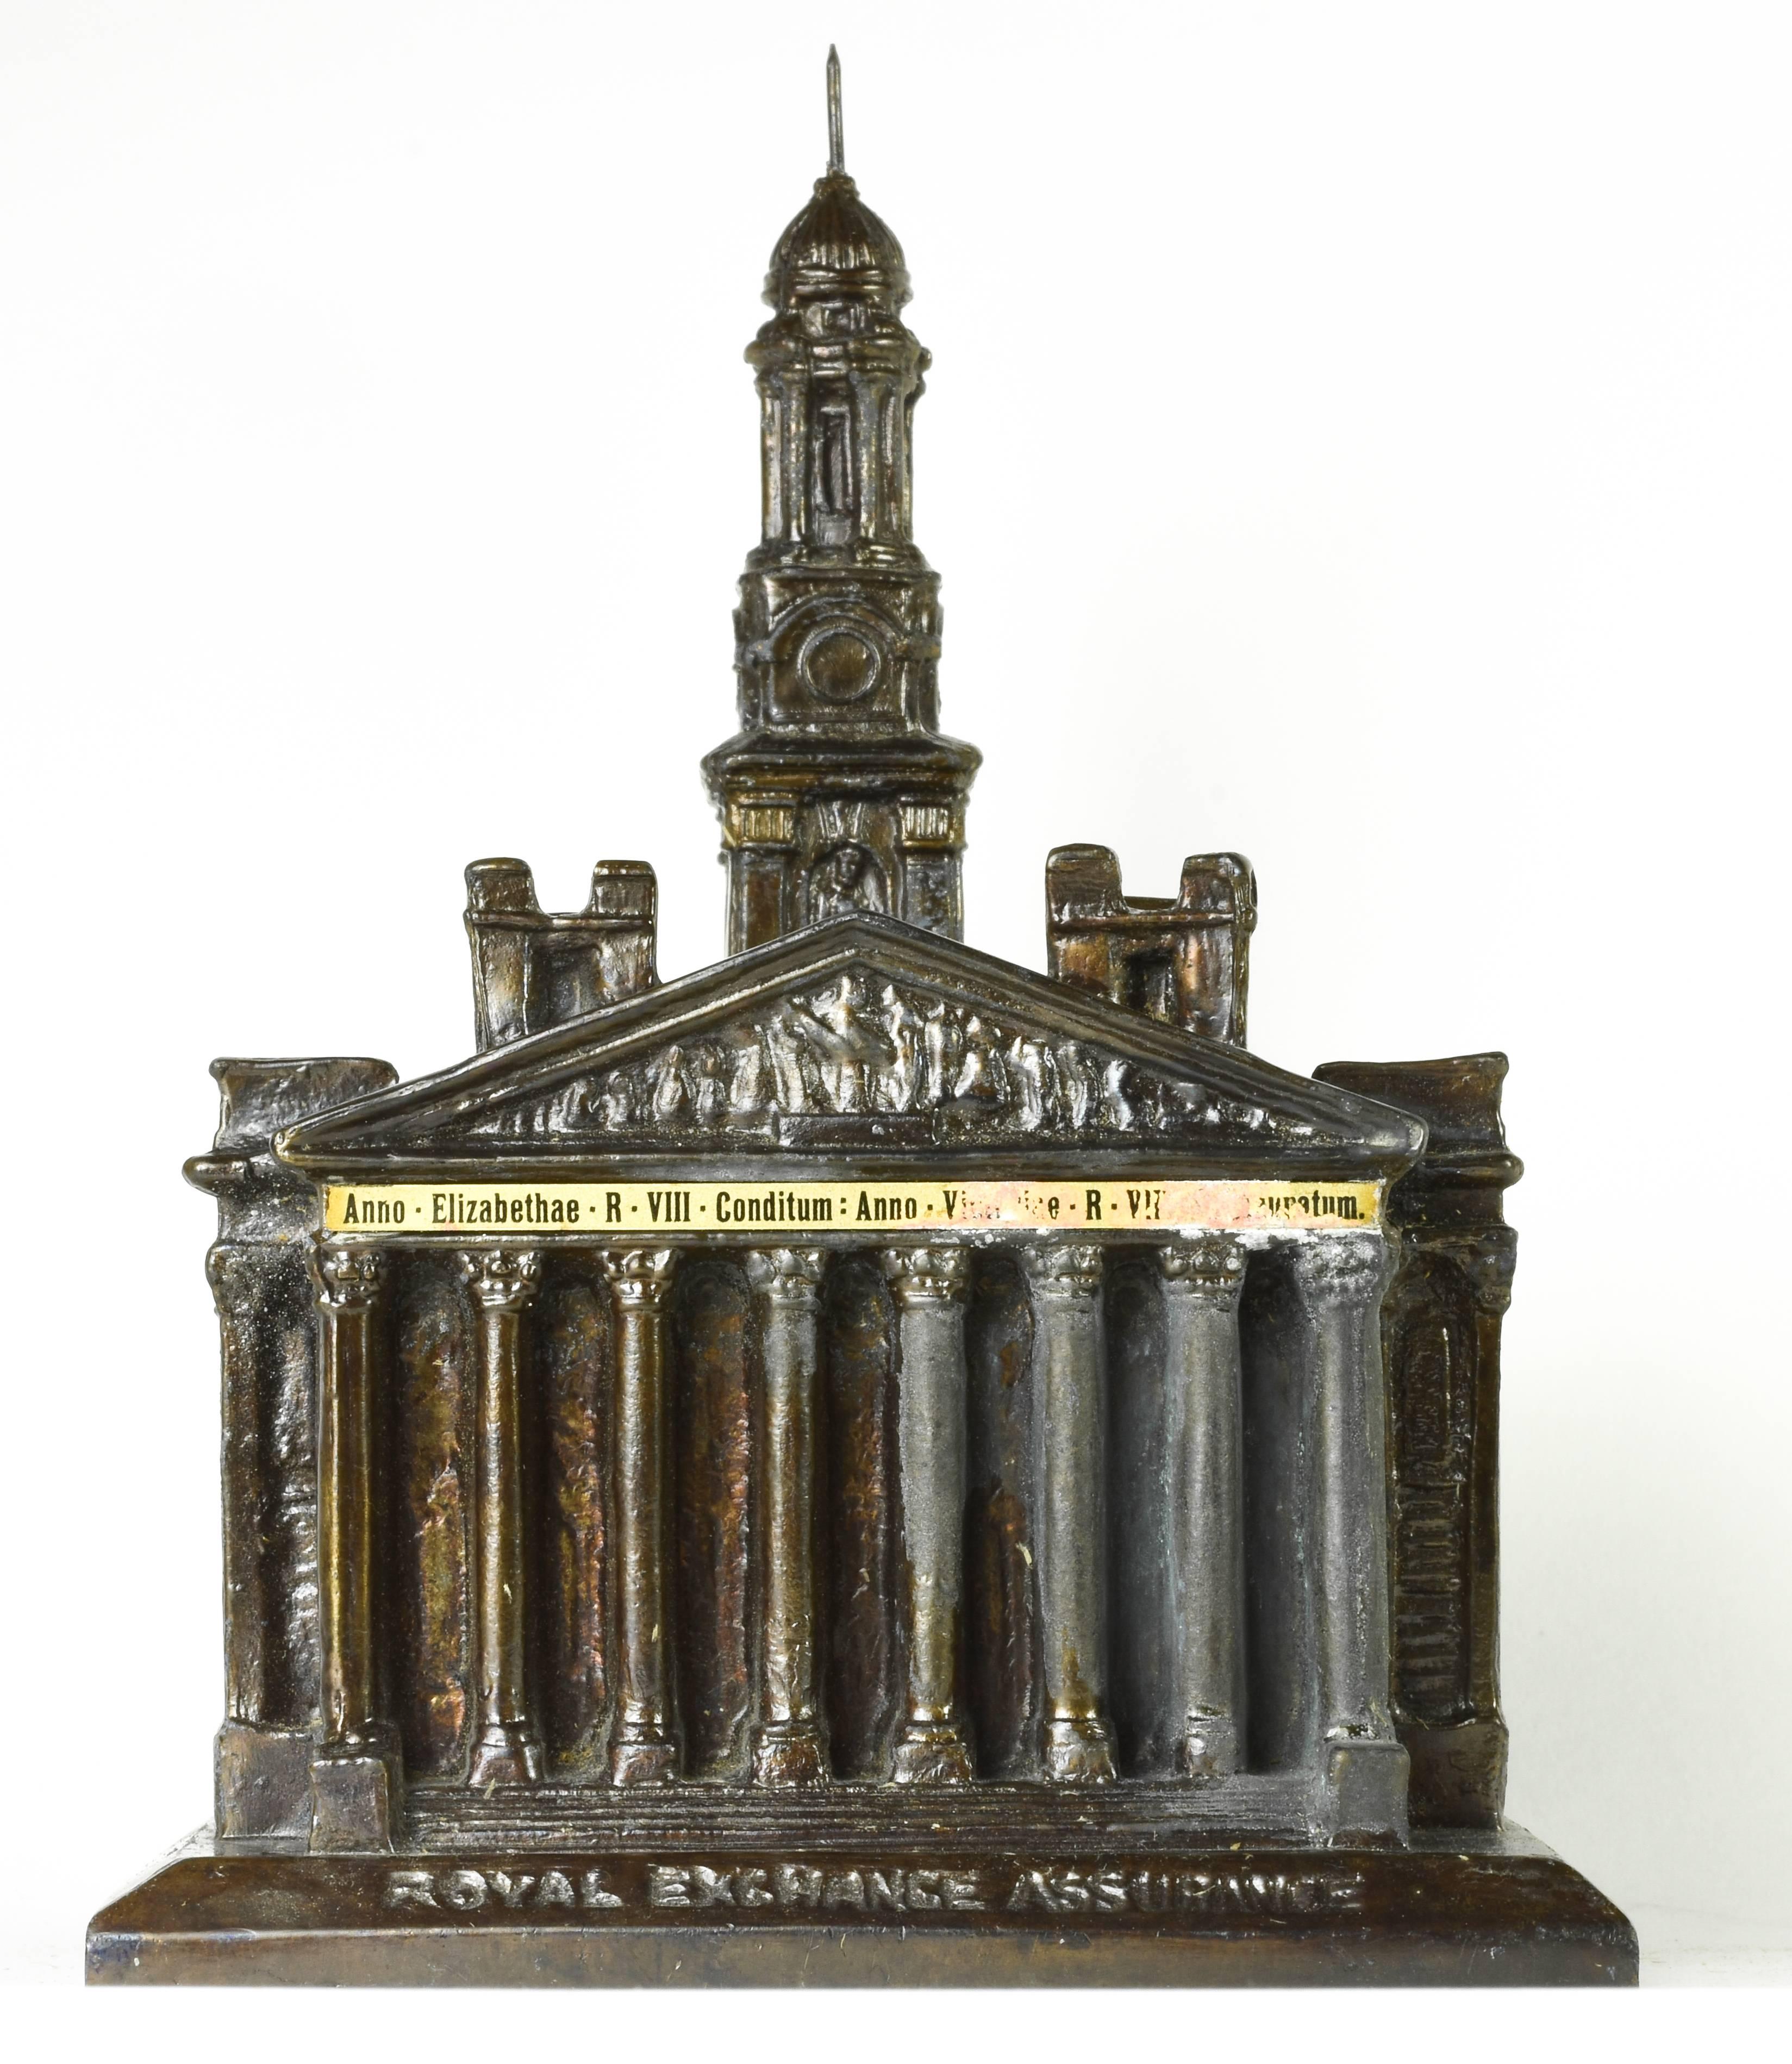 Neoclassical Revival Royal Exchange Assurance, London, 1930s Souvenir Architectural Inkwell For Sale